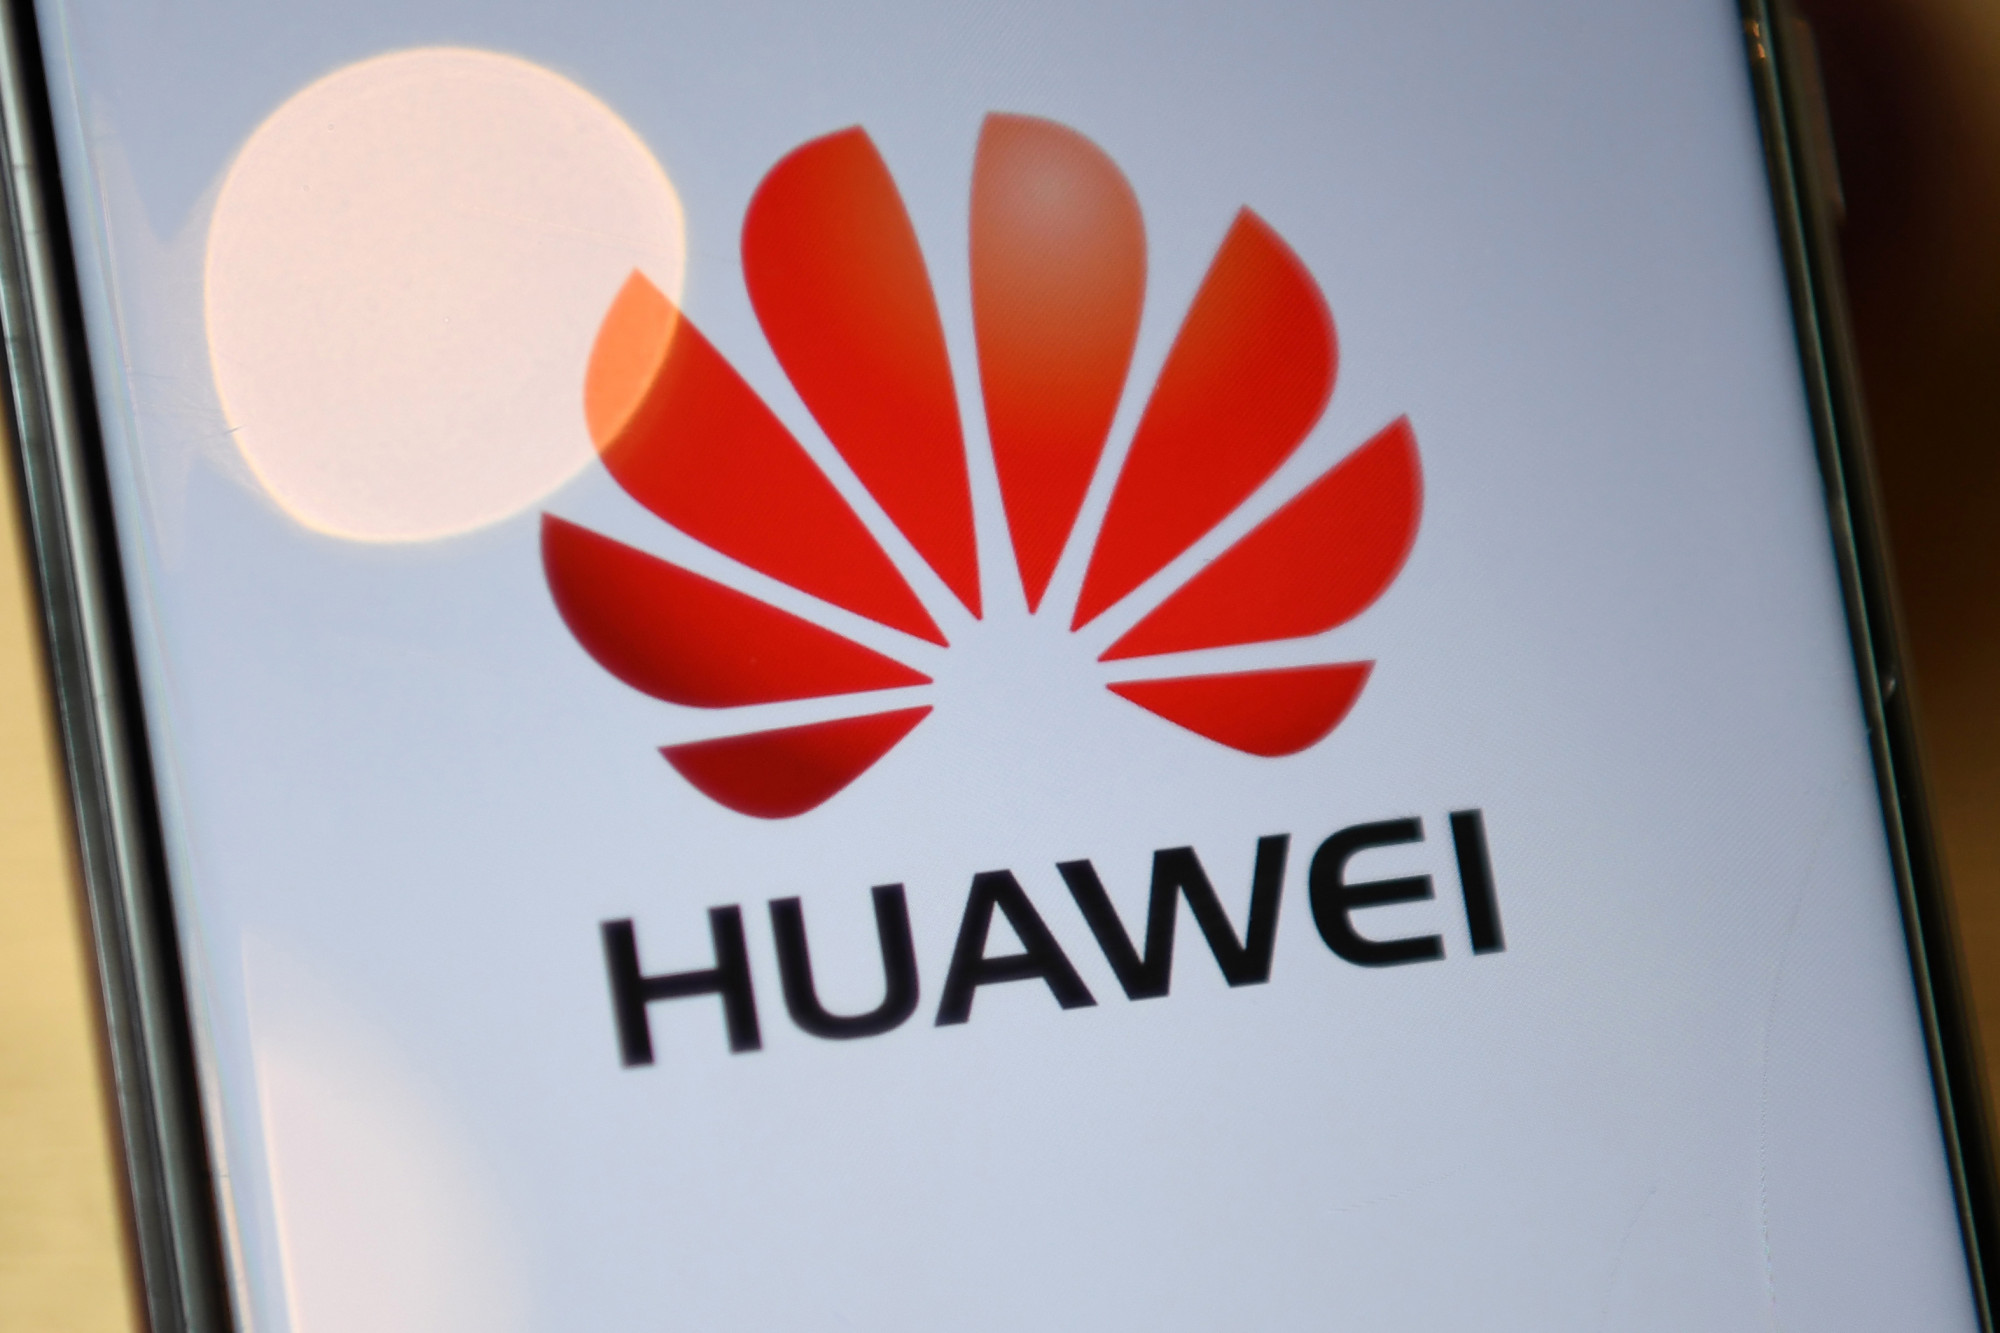 Former German Spy Chief Issues Warning on Huawei